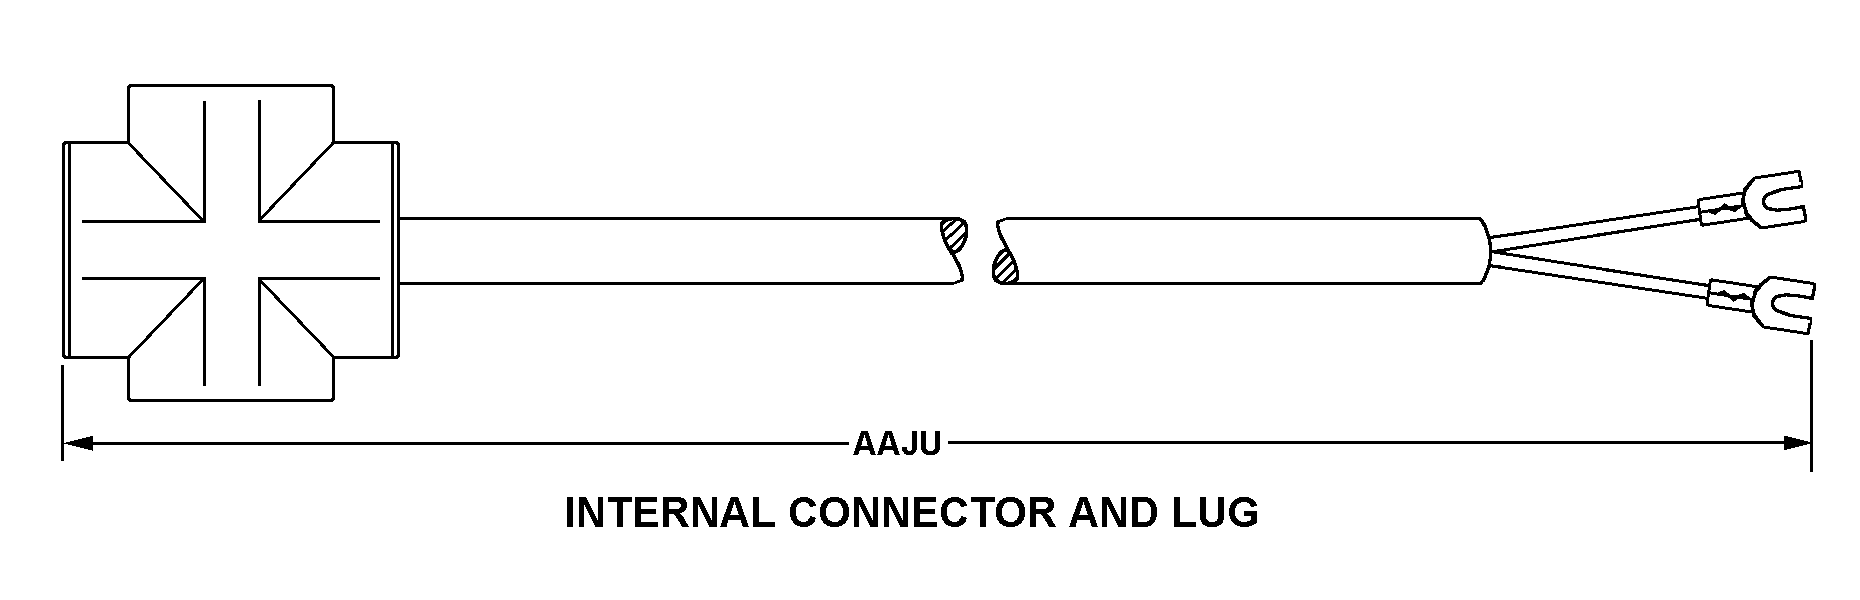 INTERNAL CONNECTOR AND LUG style nsn 6150-00-995-2998